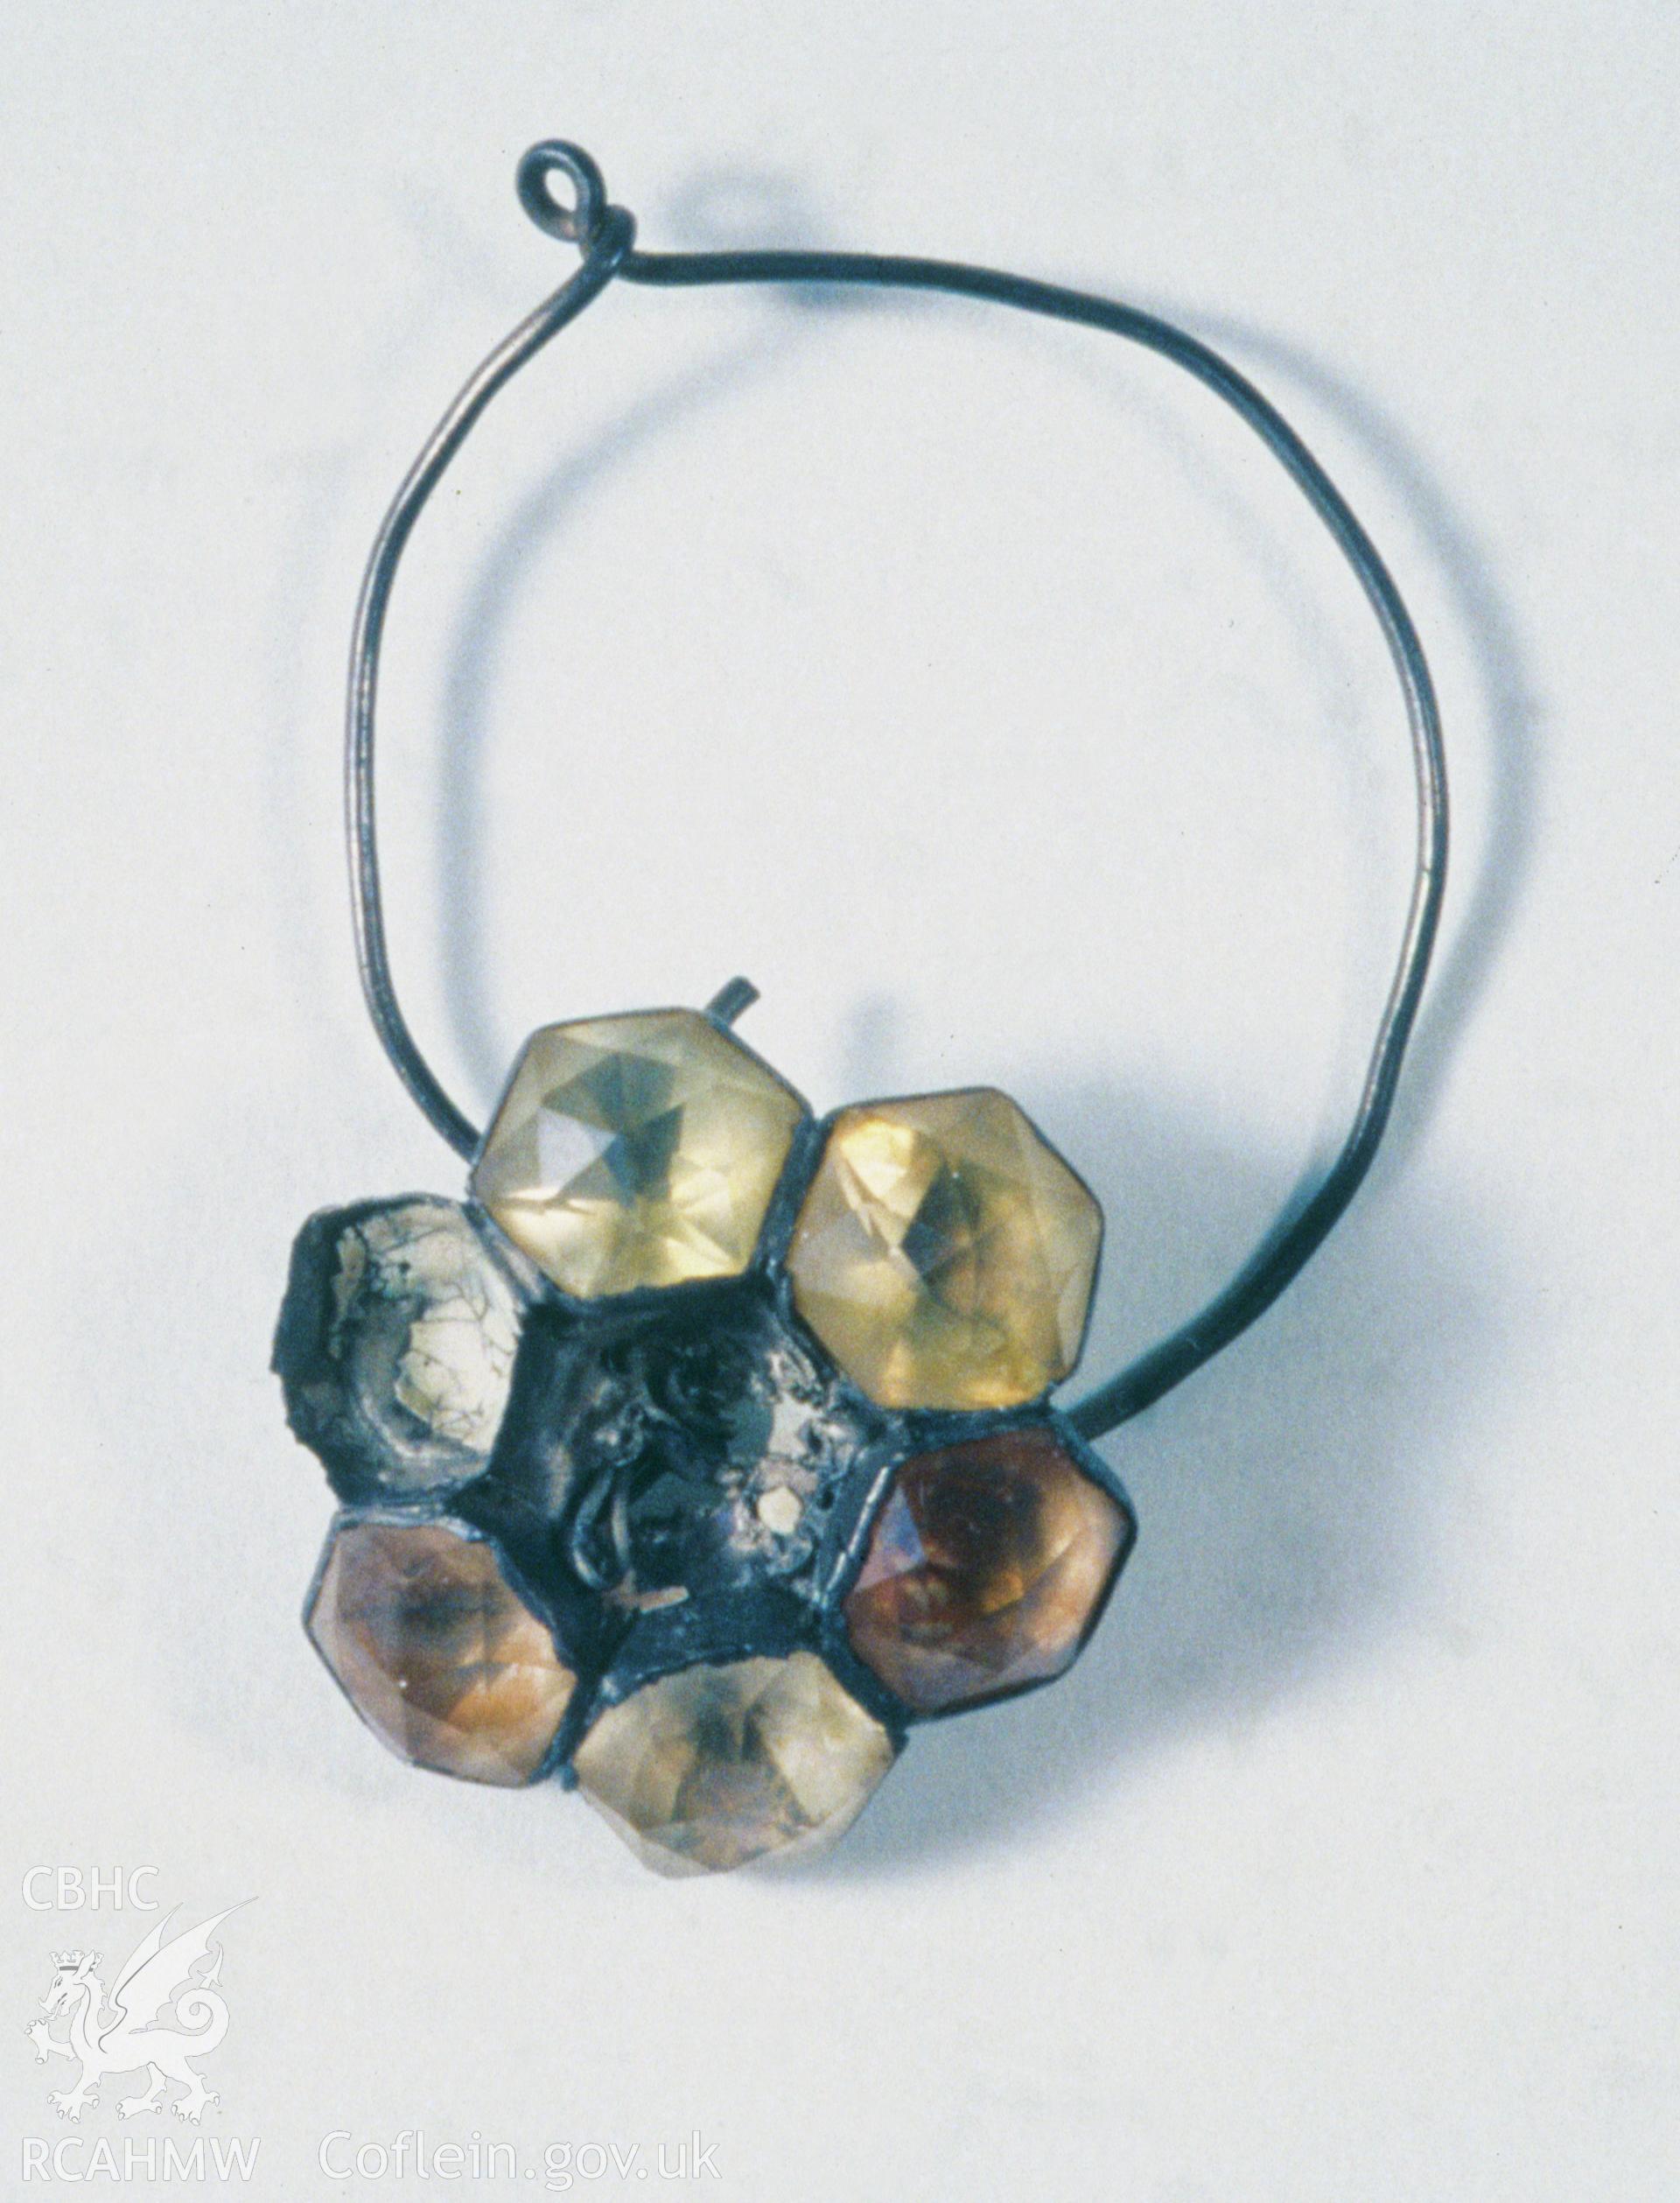 Colour slide of find, jewelry, from a survey of the Mary designated shipwreck, courtesy of National Museums, Liverpool (Merseyside Maritime Museum)